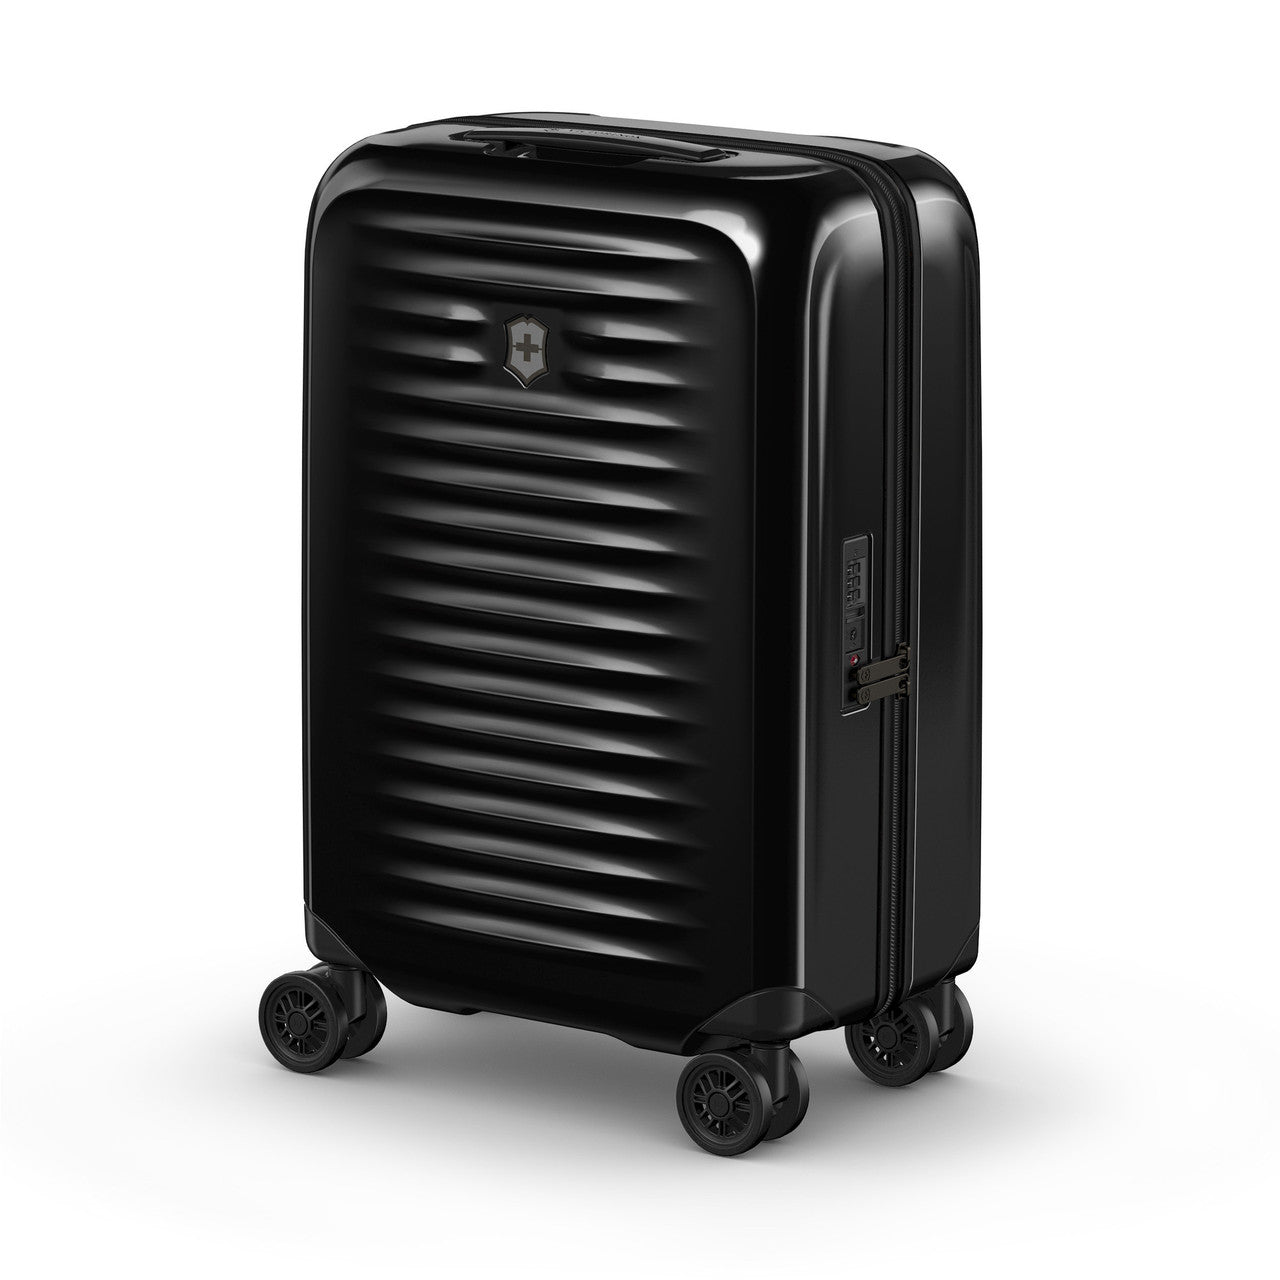 Airox Frequent Flyer Hardside Carry-On - Black D30 VICTORINOX Default Title  